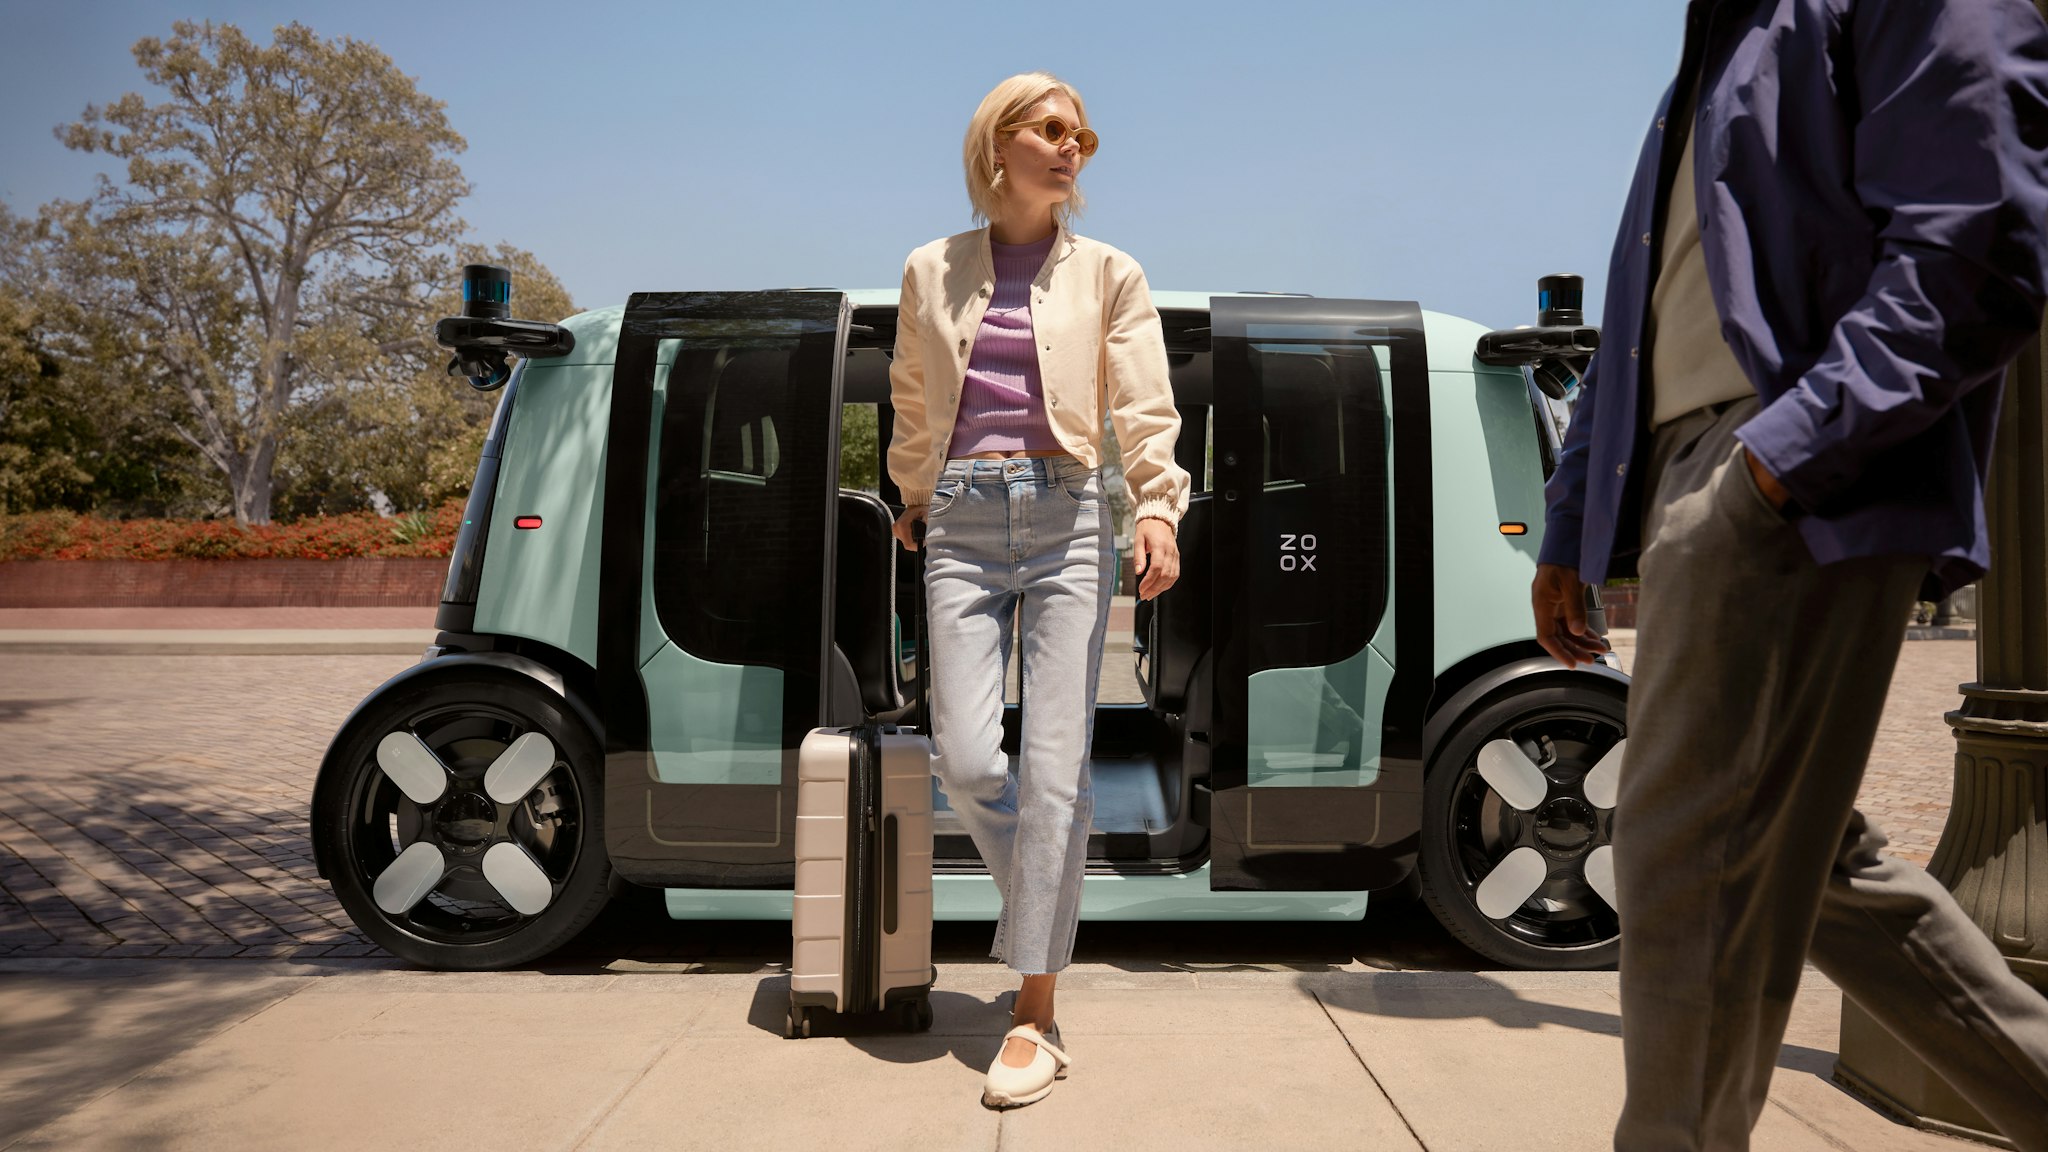 A woman exiting a Zoox robotaxi with her luggage